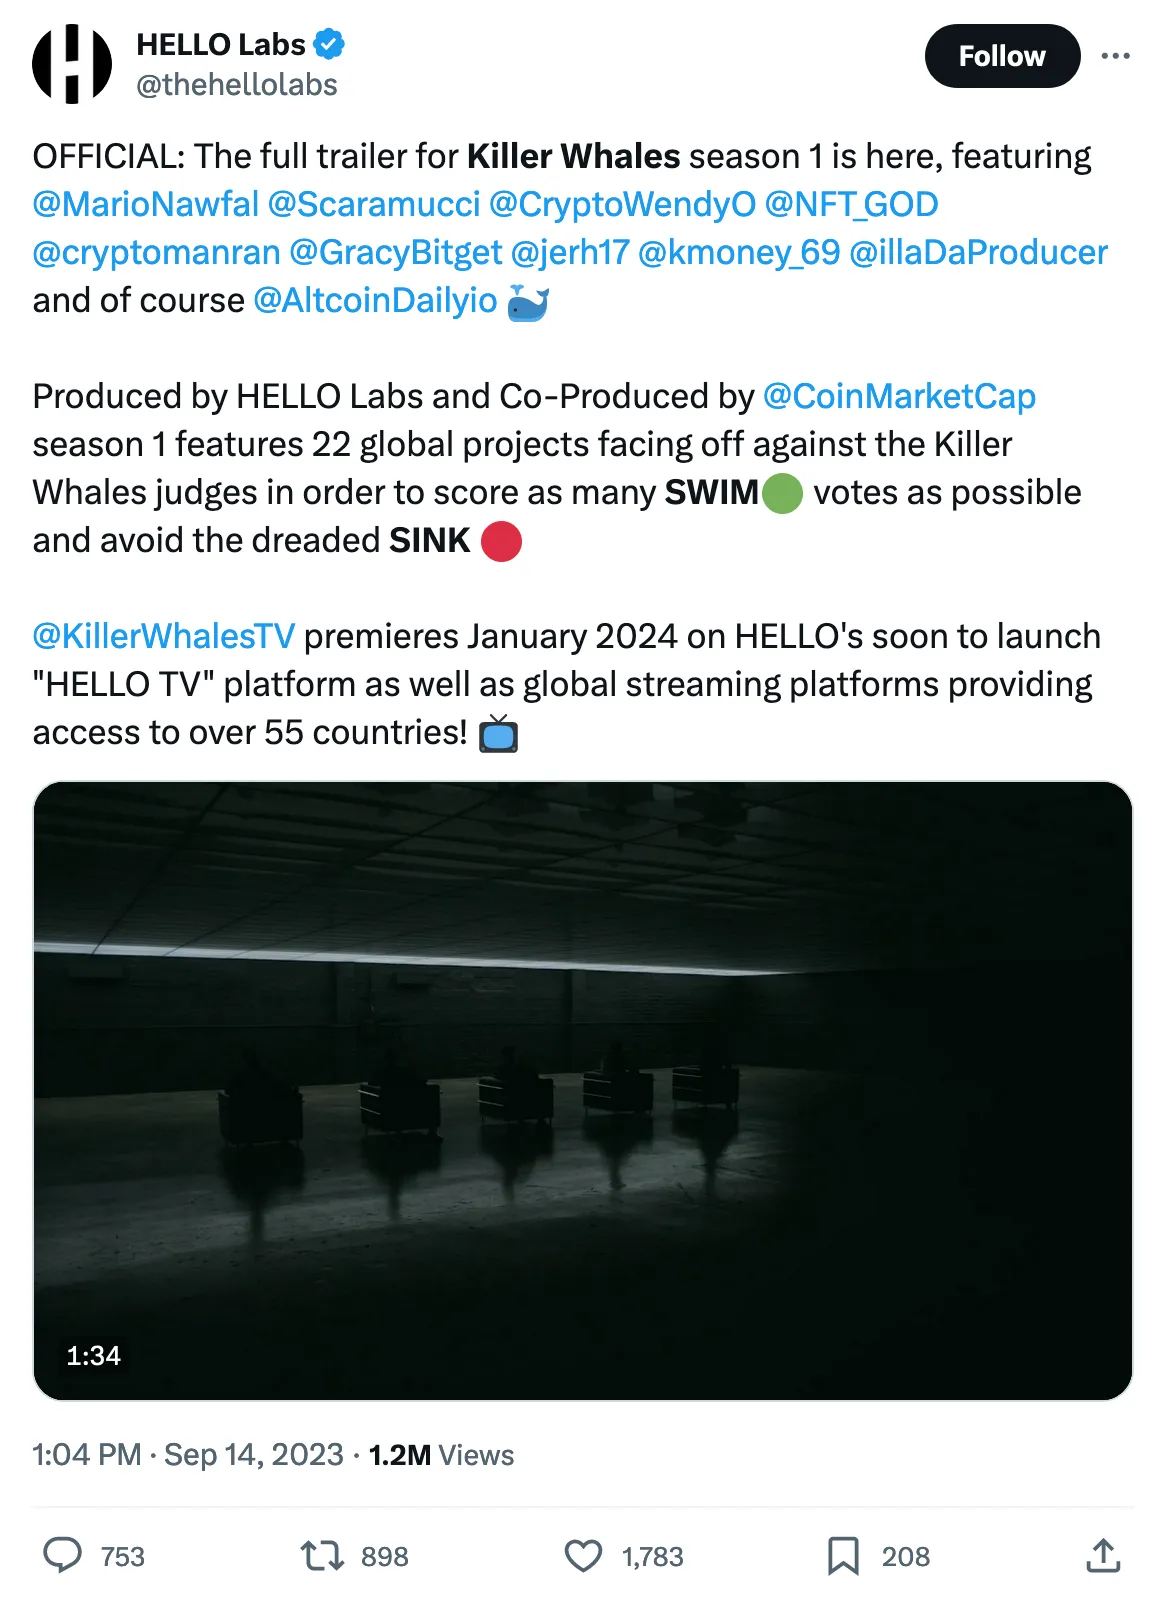 OFFICIAL: The full trailer for Killer Whales season 1 is here, featuring 
@MarioNawfal
 @Scaramucci
 @CryptoWendyO
 @NFT_GOD
 @cryptomanran
 @GracyBitget
 @jerh17
 @kmoney_69
 @illaDaProducer
 and of course 
@AltcoinDailyio
 

Produced by HELLO Labs and Co-Produced by 
@CoinMarketCap
 season 1 features 22 global projects facing off against the Killer Whales judges in order to score as many SWIM votes as possible and avoid the dreaded SINK 
@KillerWhalesTV
 premieres January 2024 on HELLO's soon to launch "HELLO TV" platform as well as global streaming platforms providing access to over 55 countries!  
Tweeted at 1:04 PM · Sep 14, 2023